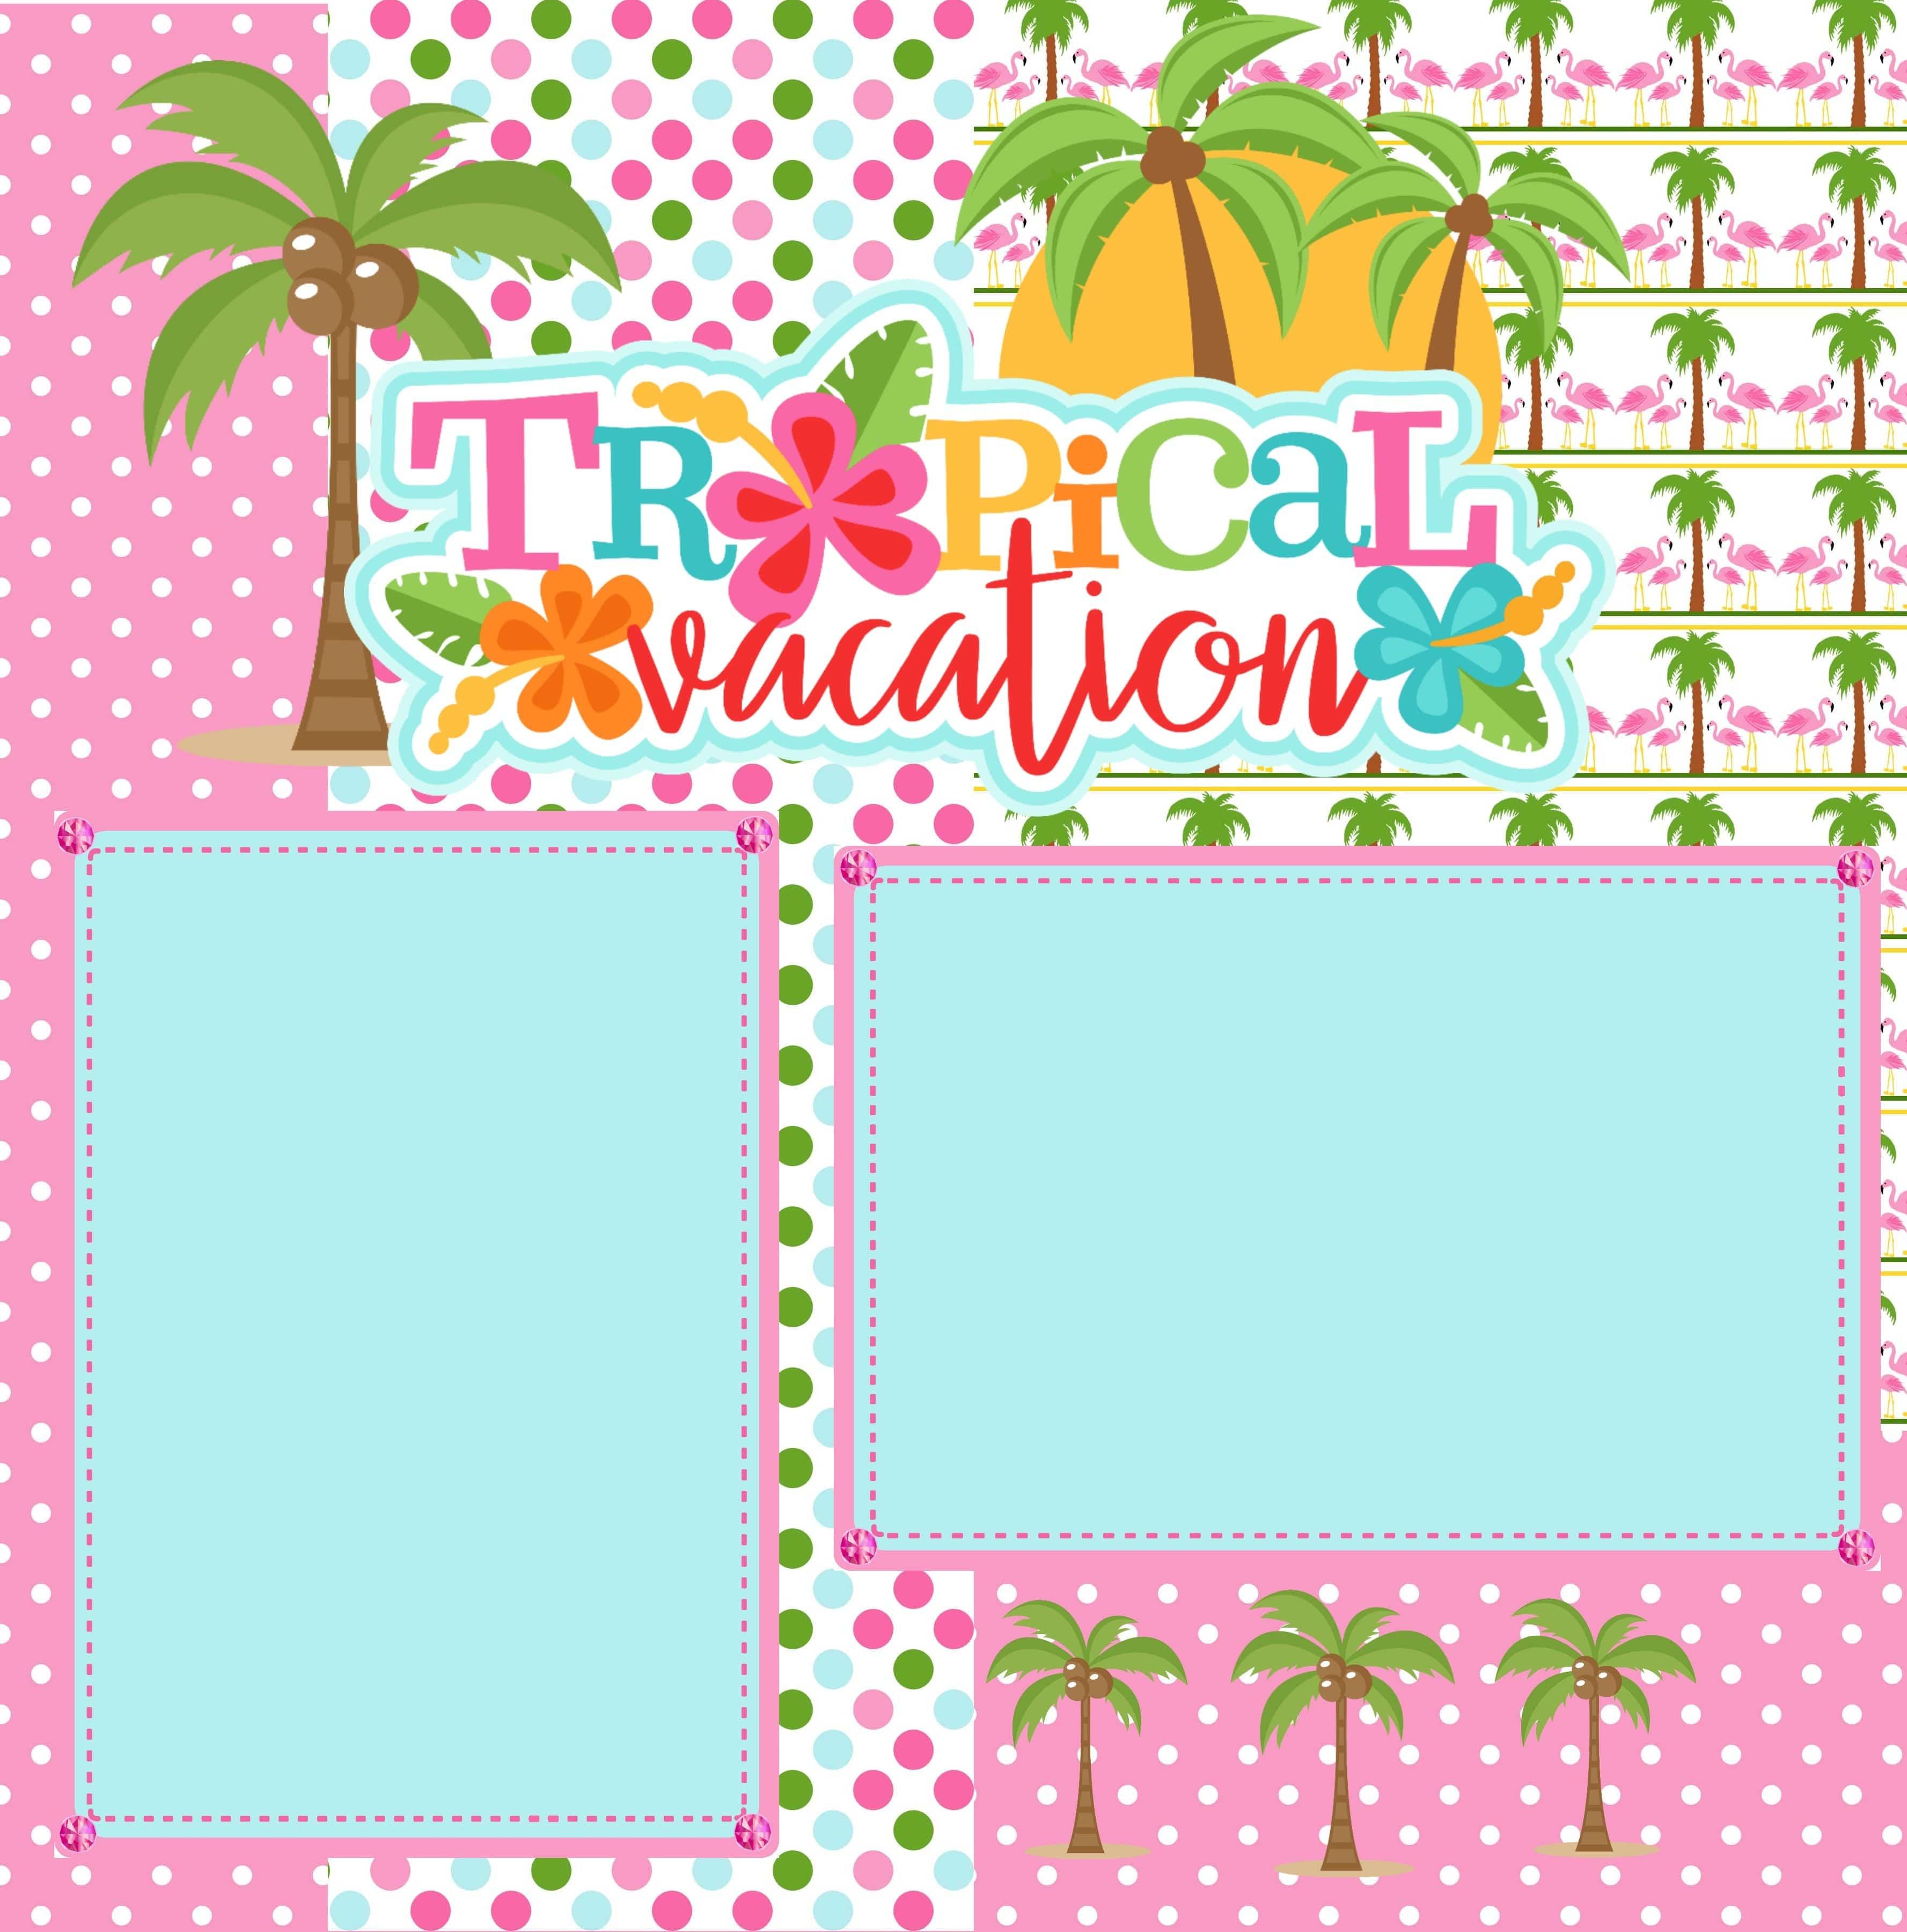 Tropical Vacation Palm Trees (2) - 12 x 12 Premade, Printed Scrapbook Pages by SSC Designs - Scrapbook Supply Companies